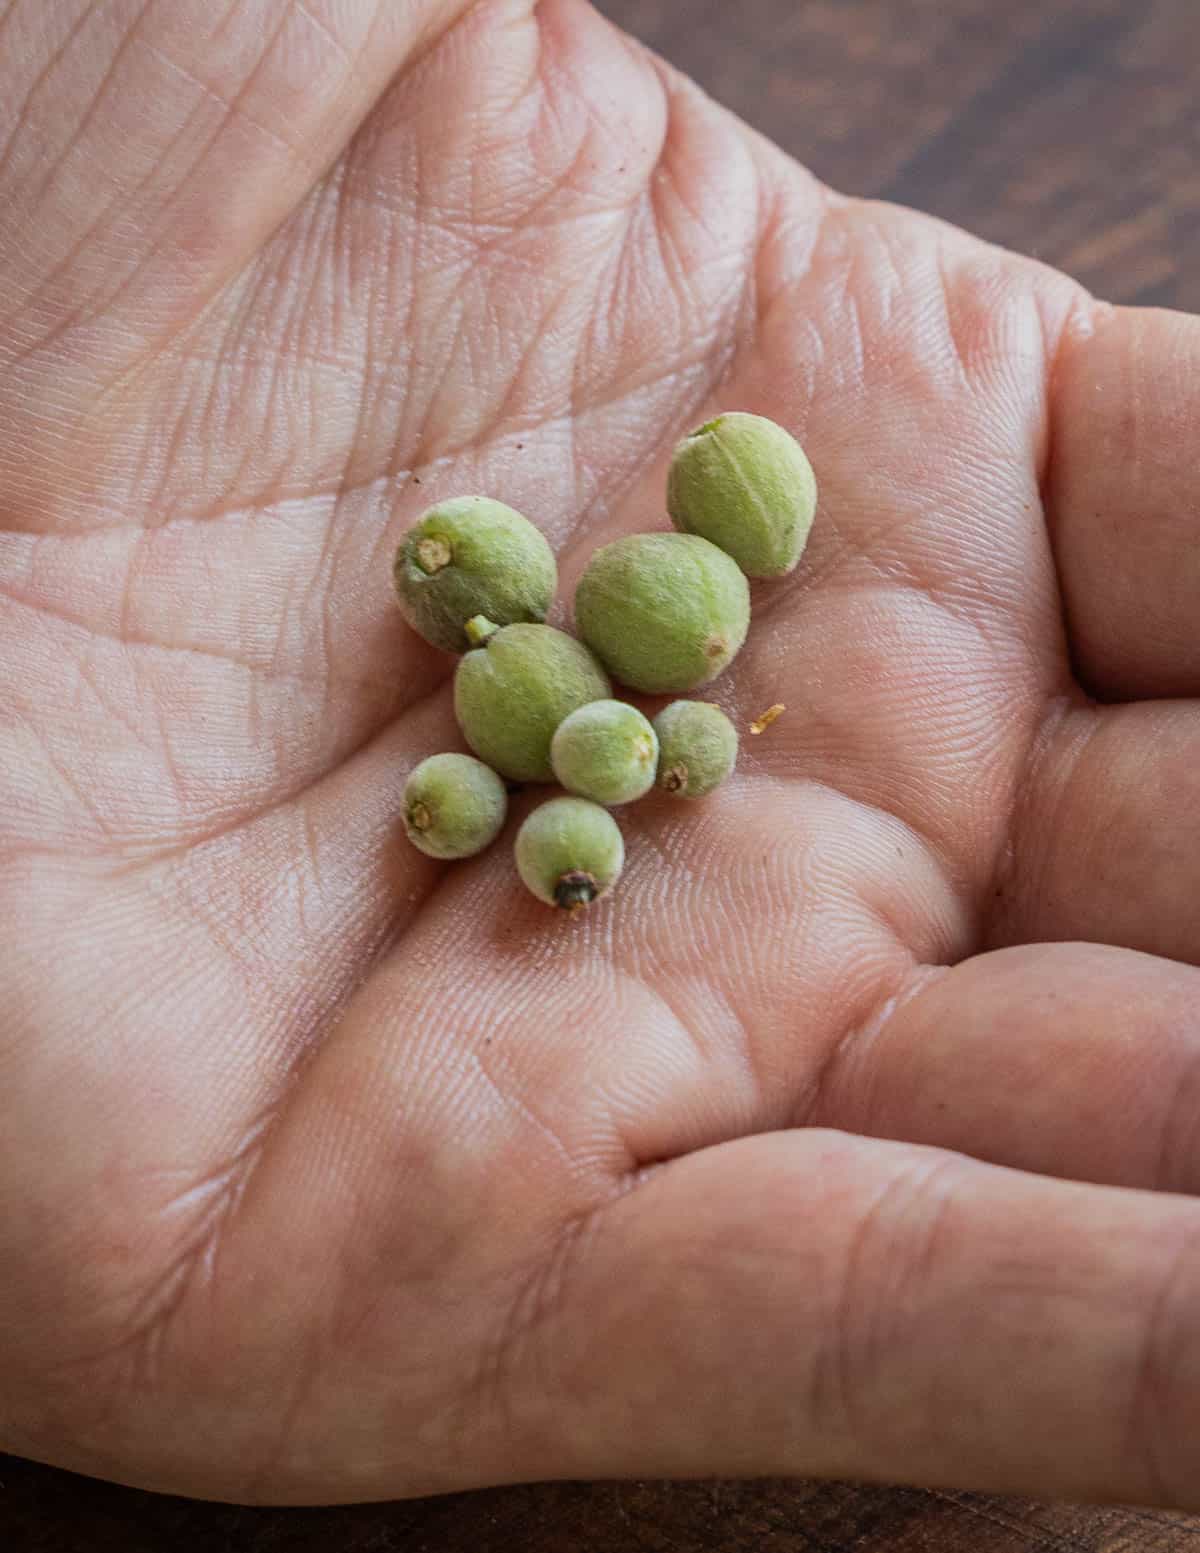 Green linden seeds of various sizes in a palm. 